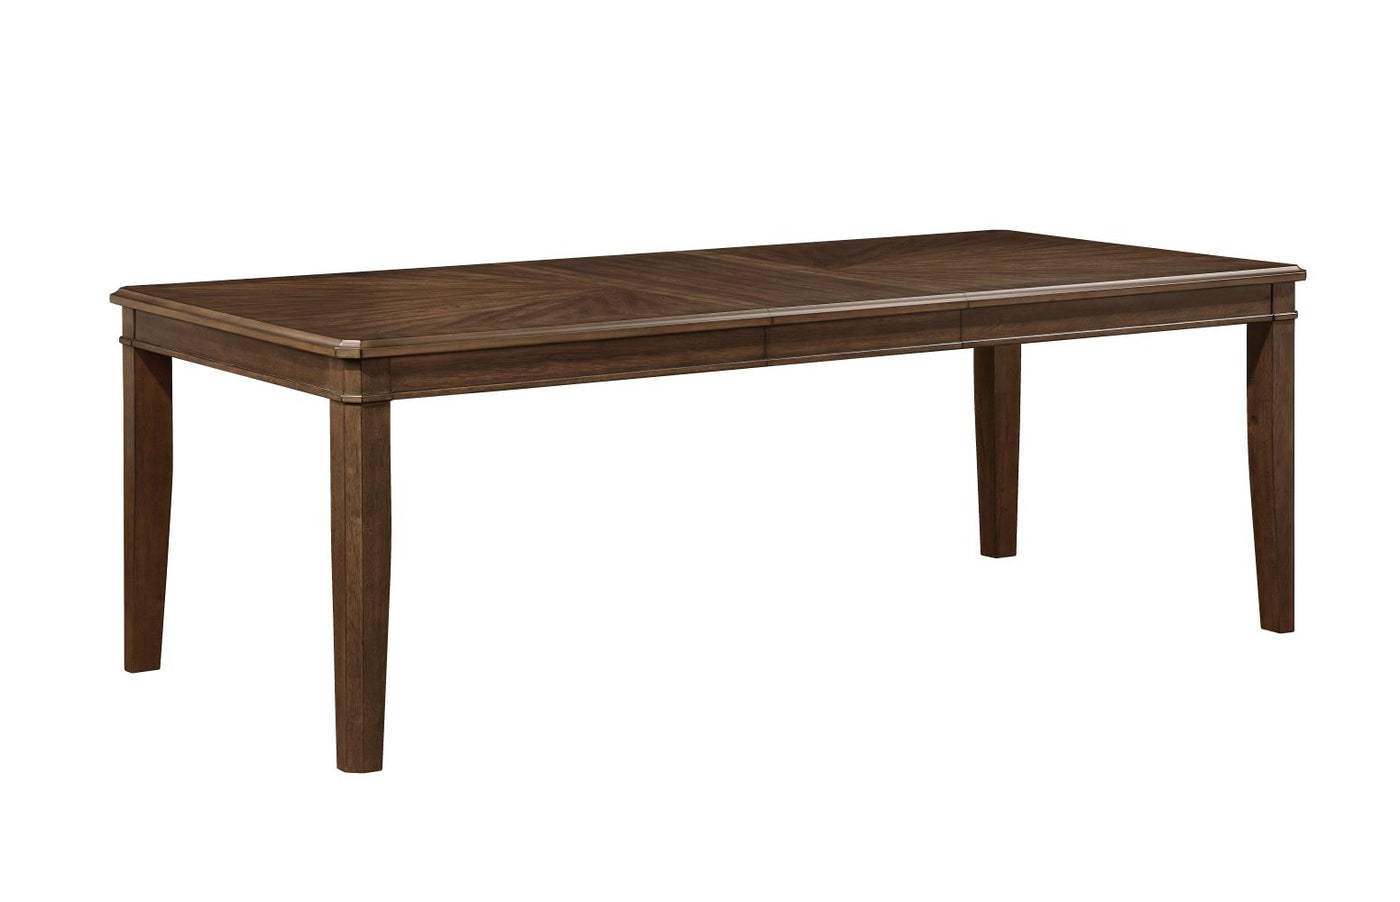 Spice Extendable Dining Table - Dark Cherry